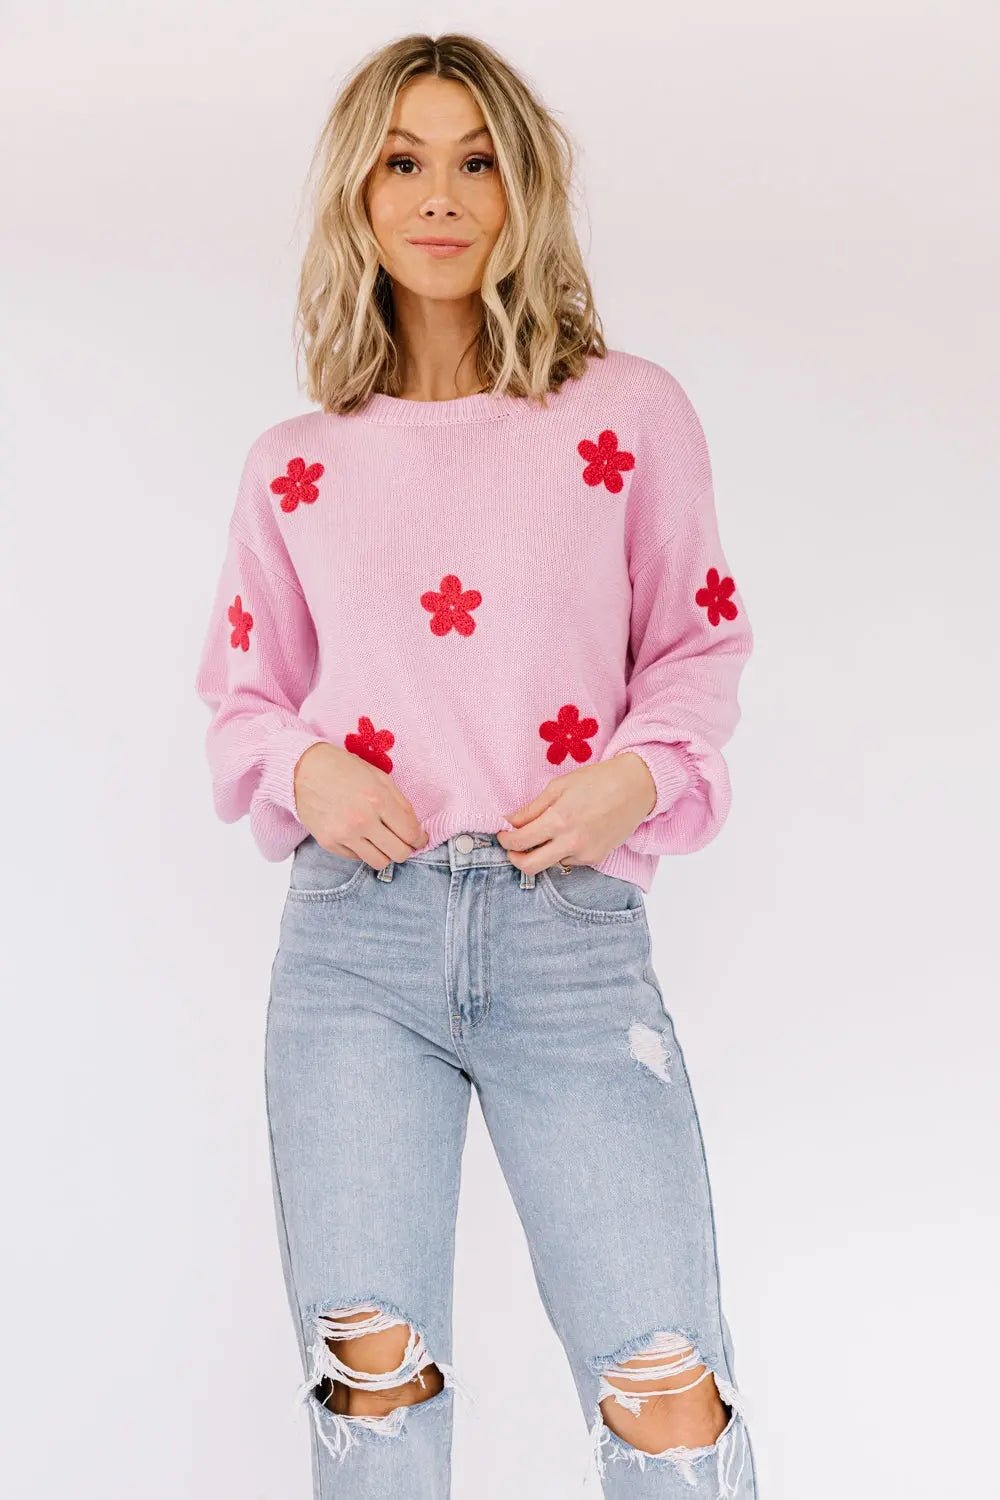 Annabelle Floral Embroidered Sweater - PINK - JO+CO